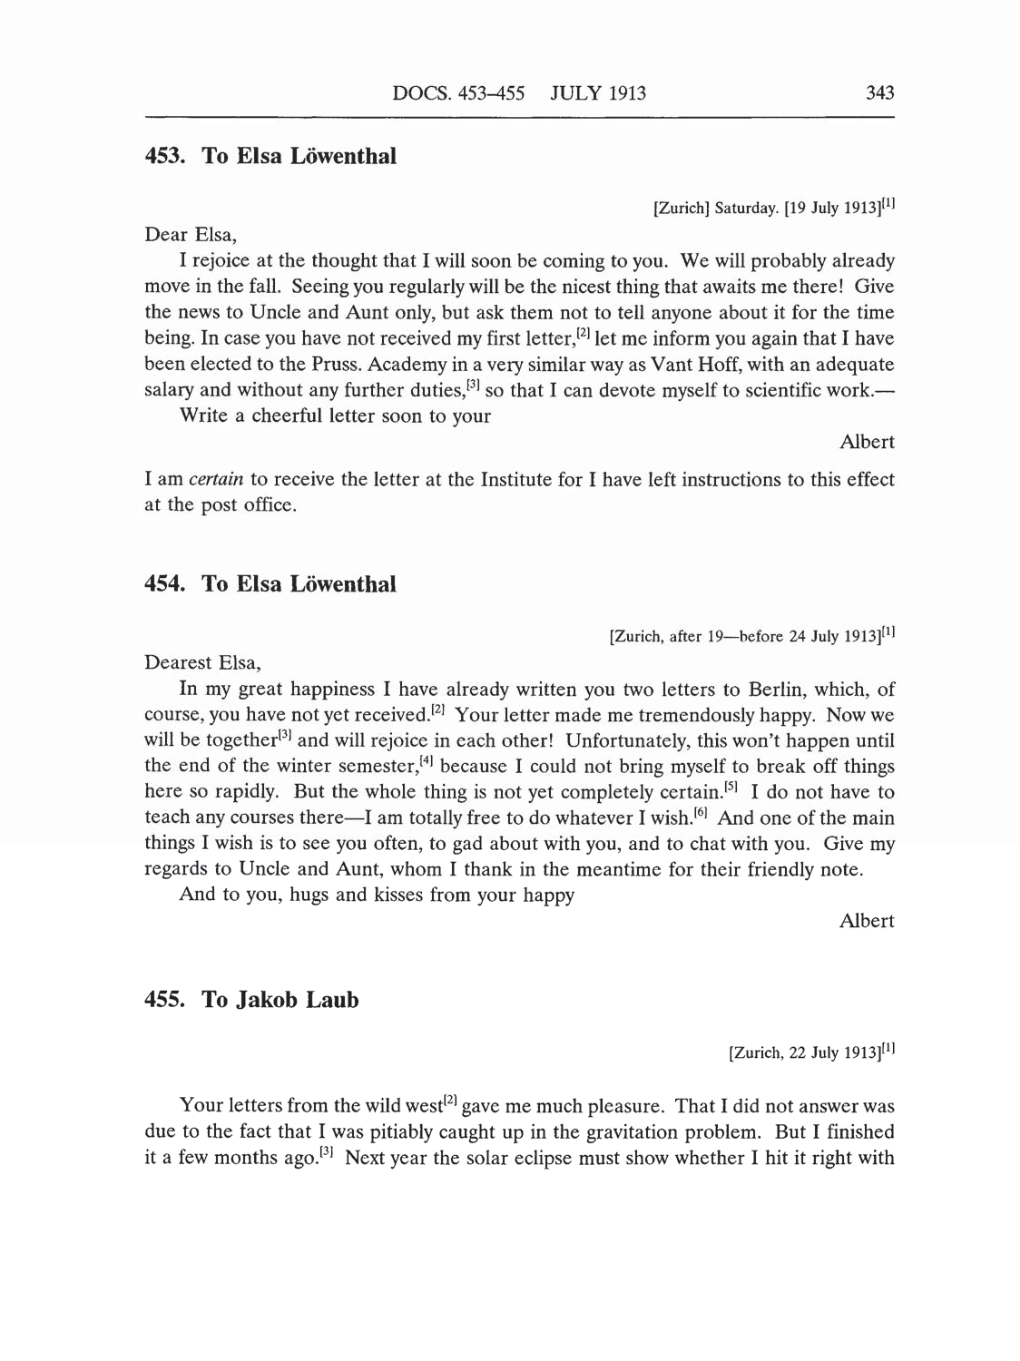 Volume 5: The Swiss Years: Correspondence, 1902-1914 (English translation supplement) page 343